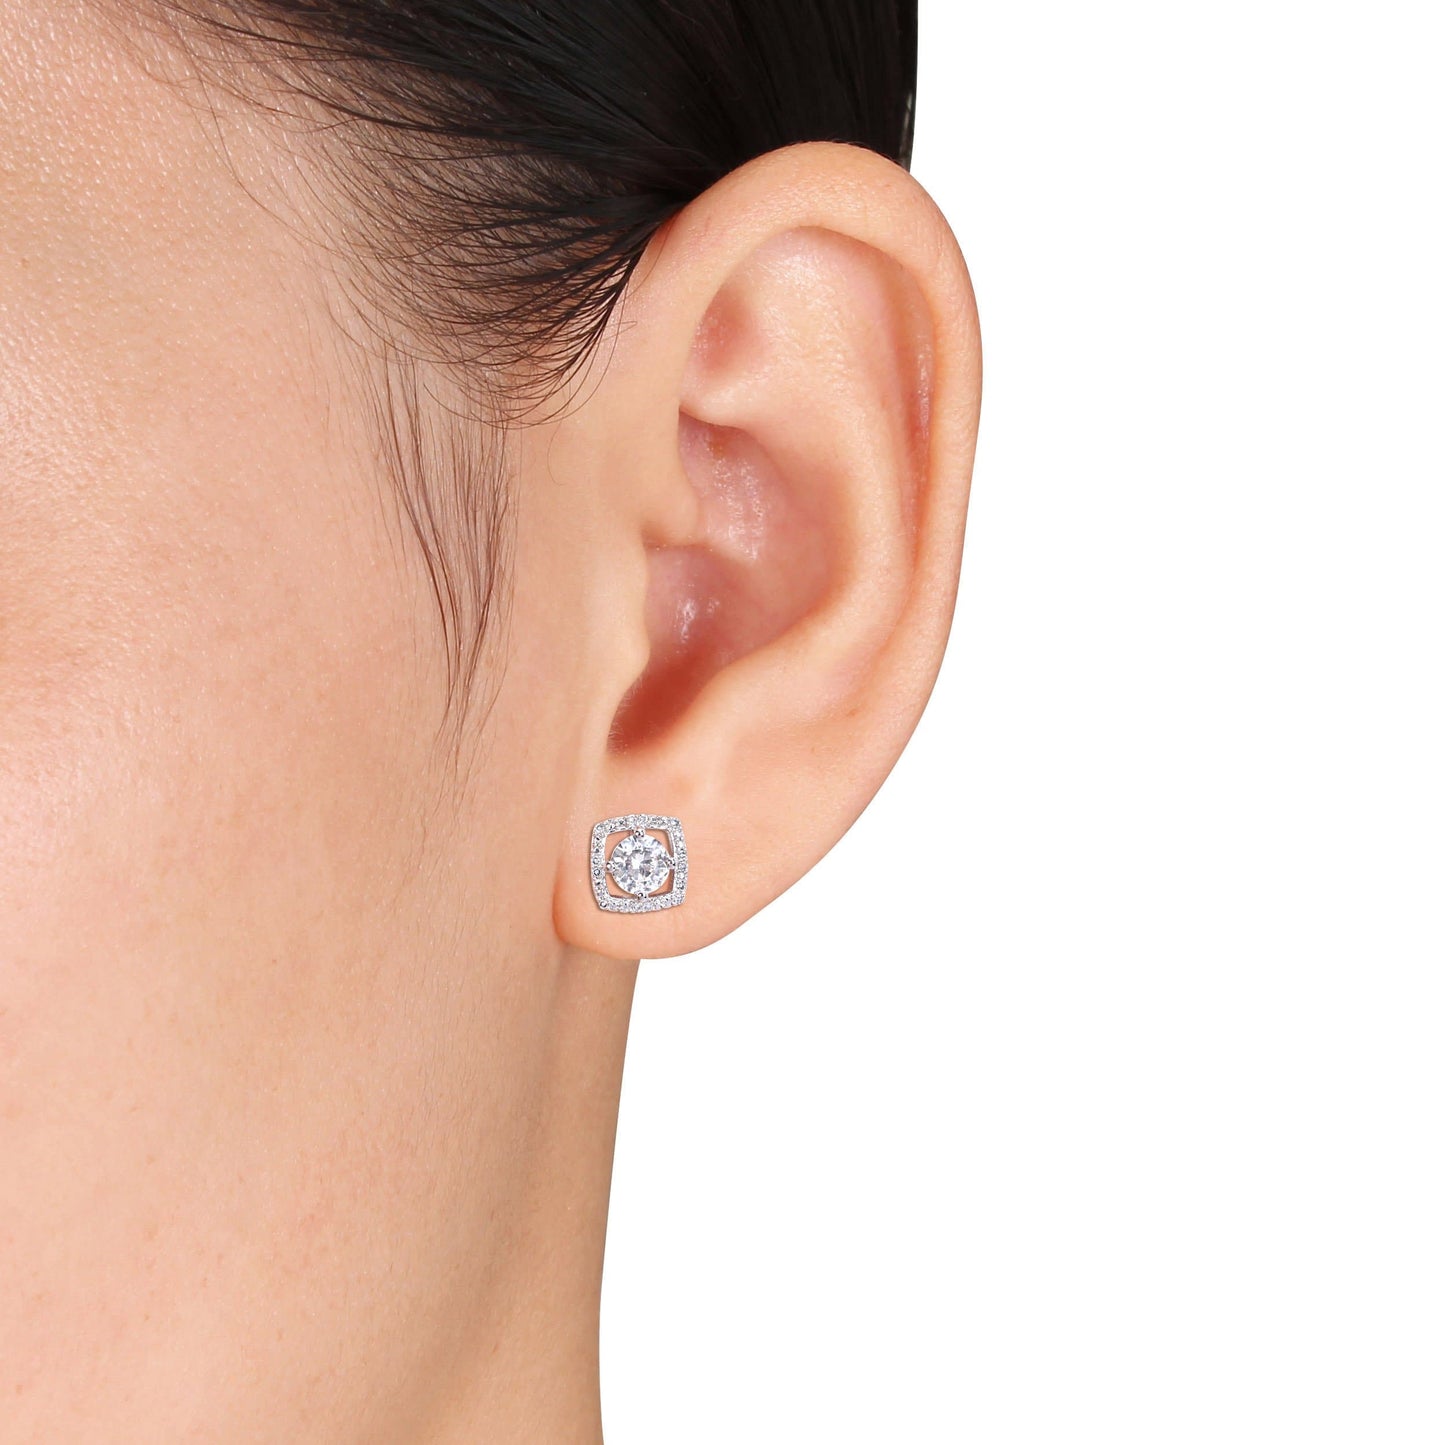 Julie Leah White Sapphire & Diamond Floating Studs in 10k White Gold